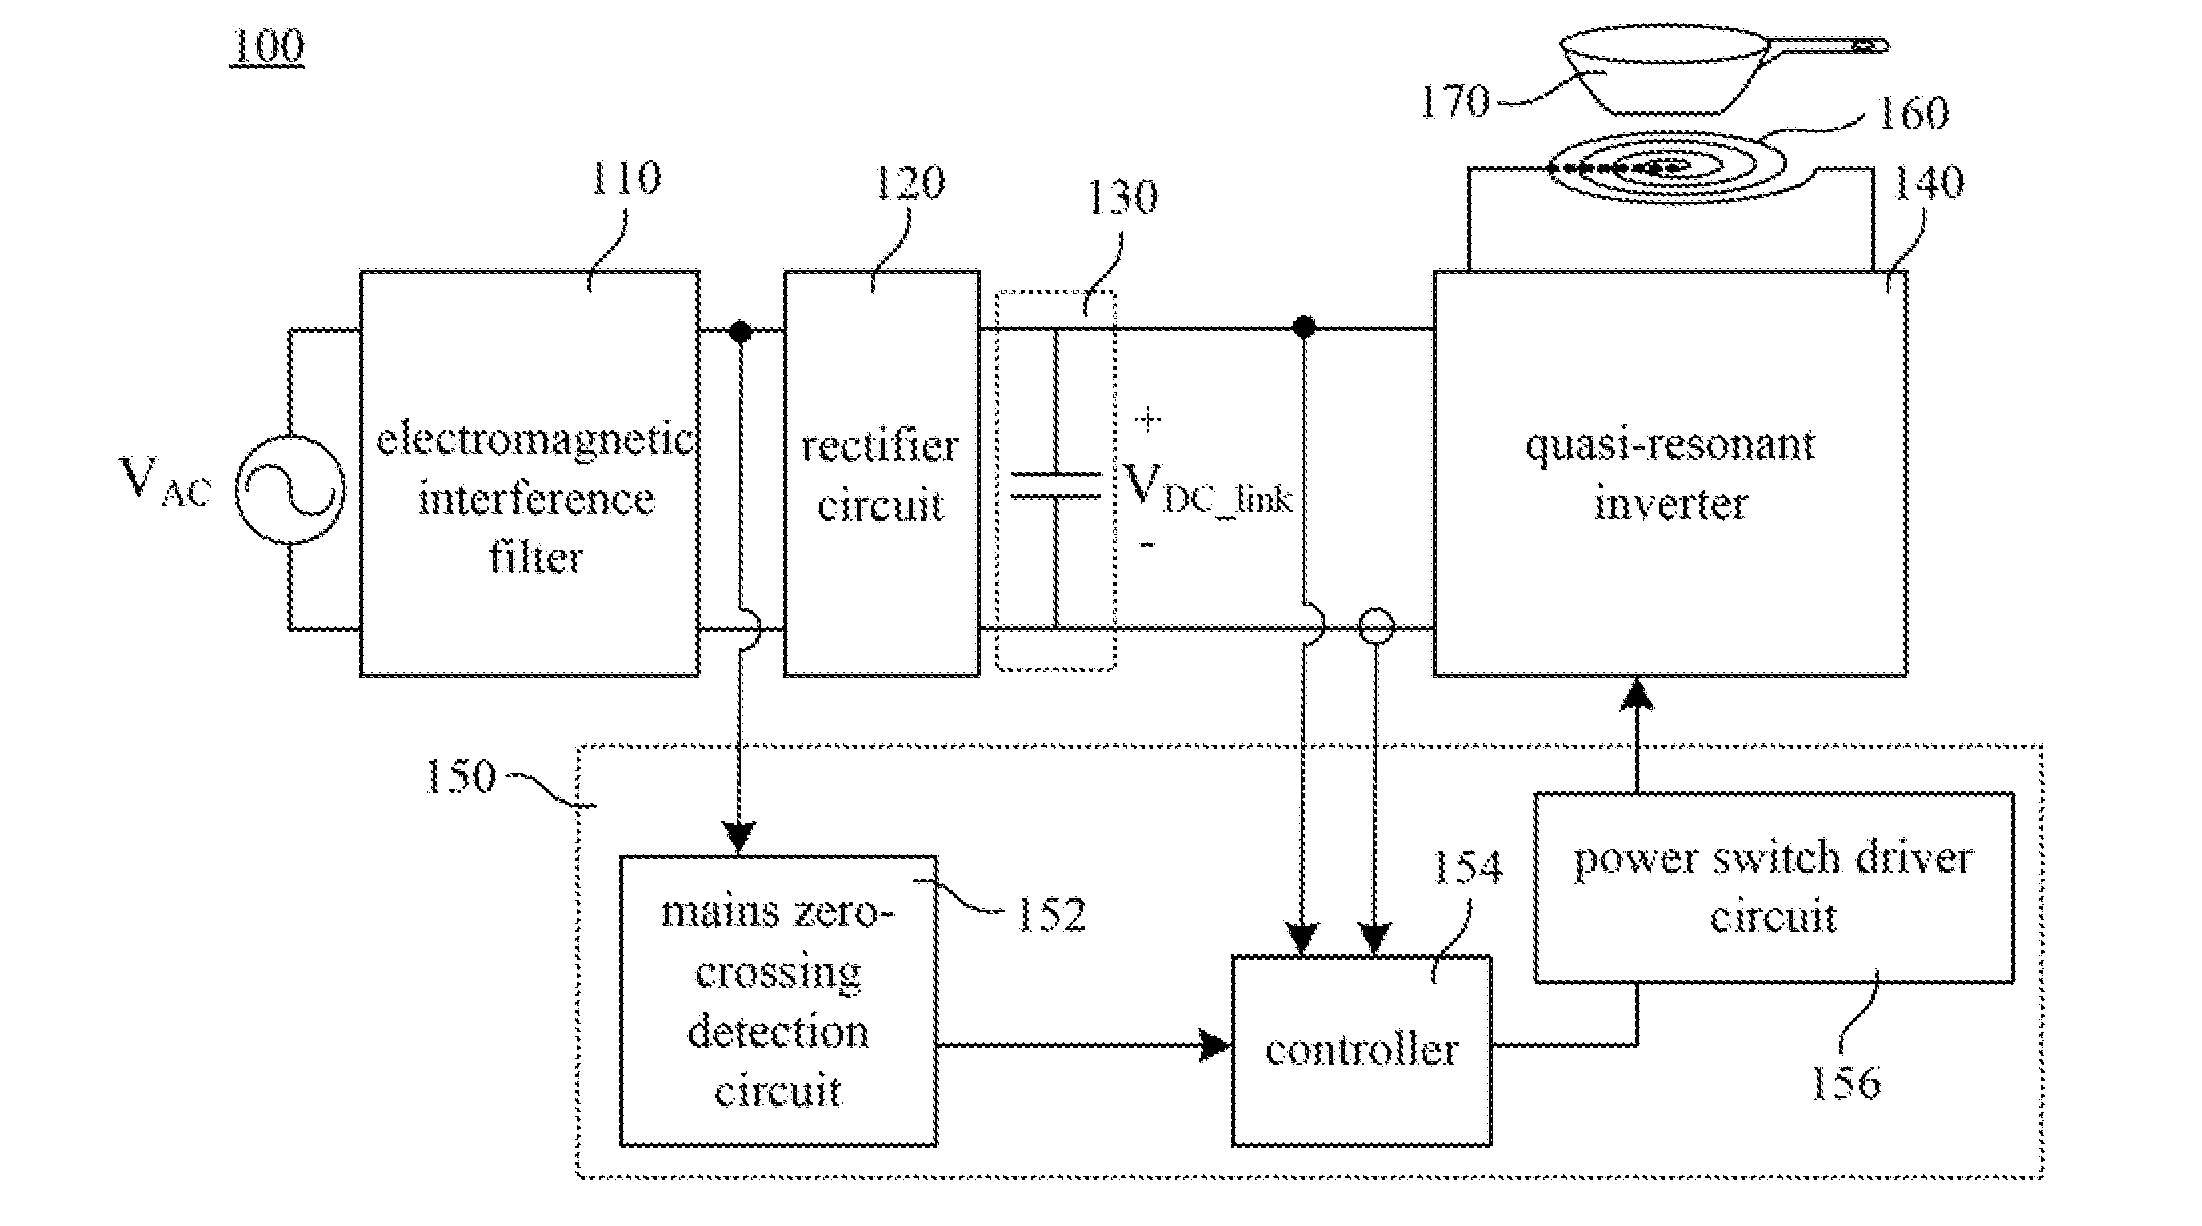 System and method for controlling quasi-resonant inverter and electric heating device employing the same